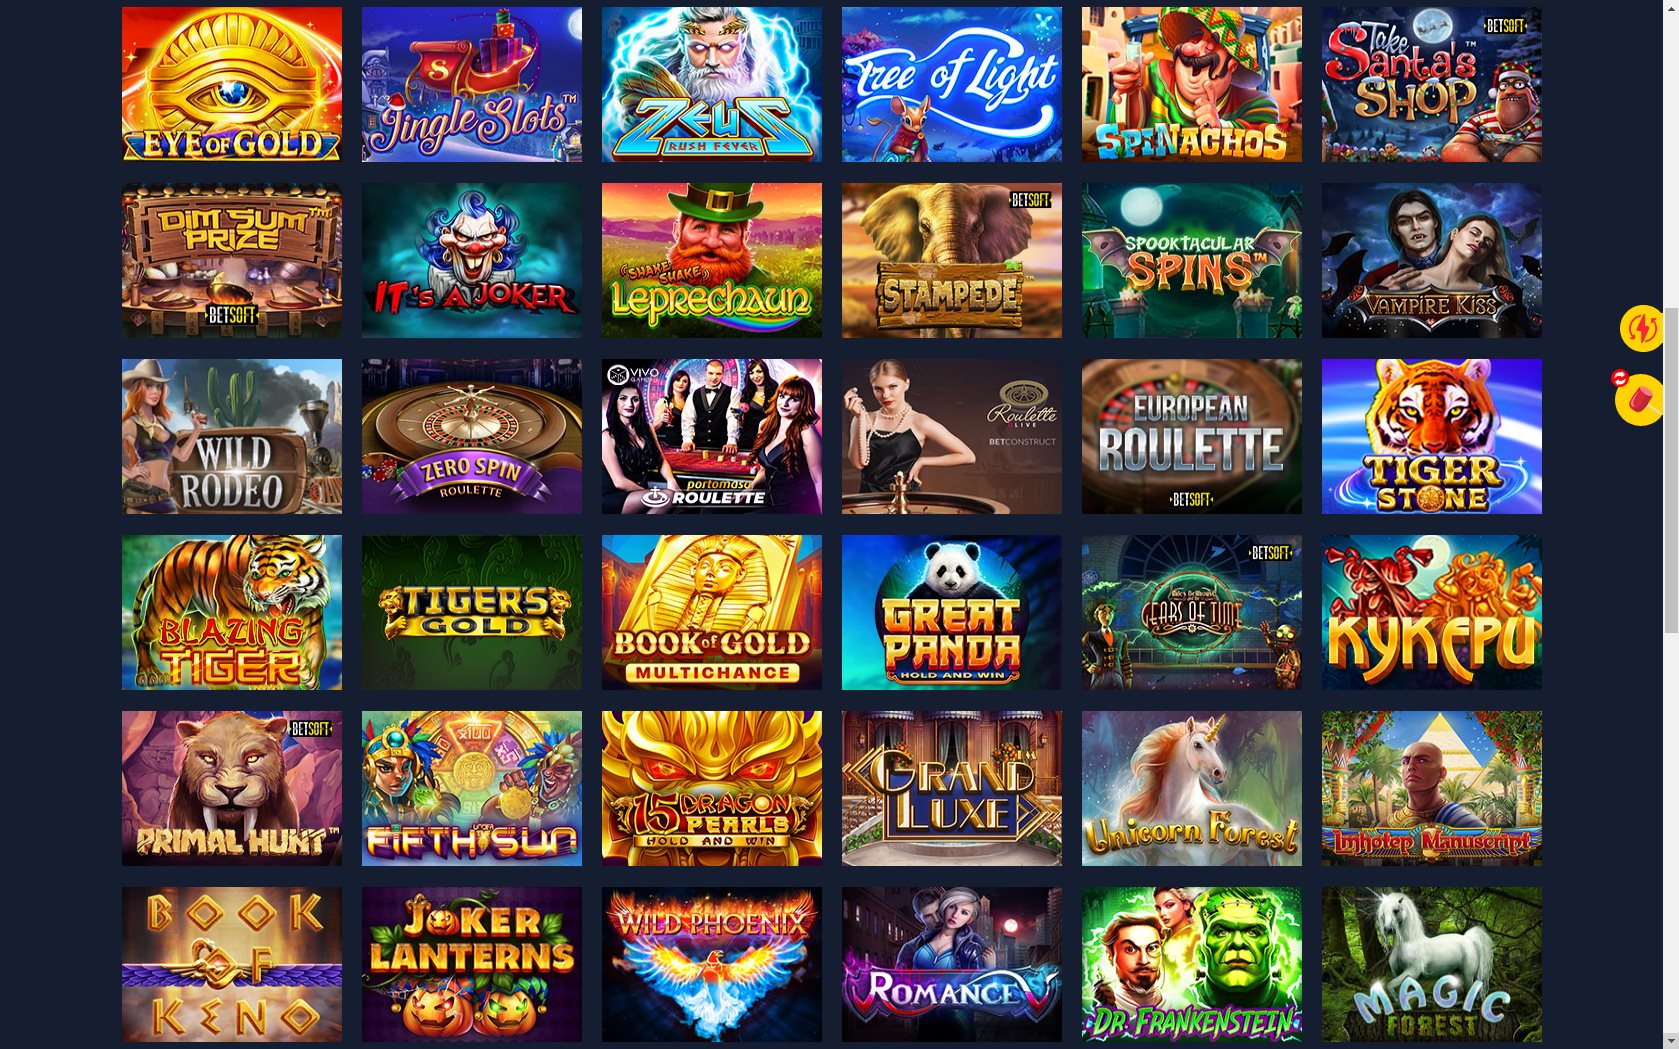 Spin-up Casino Games